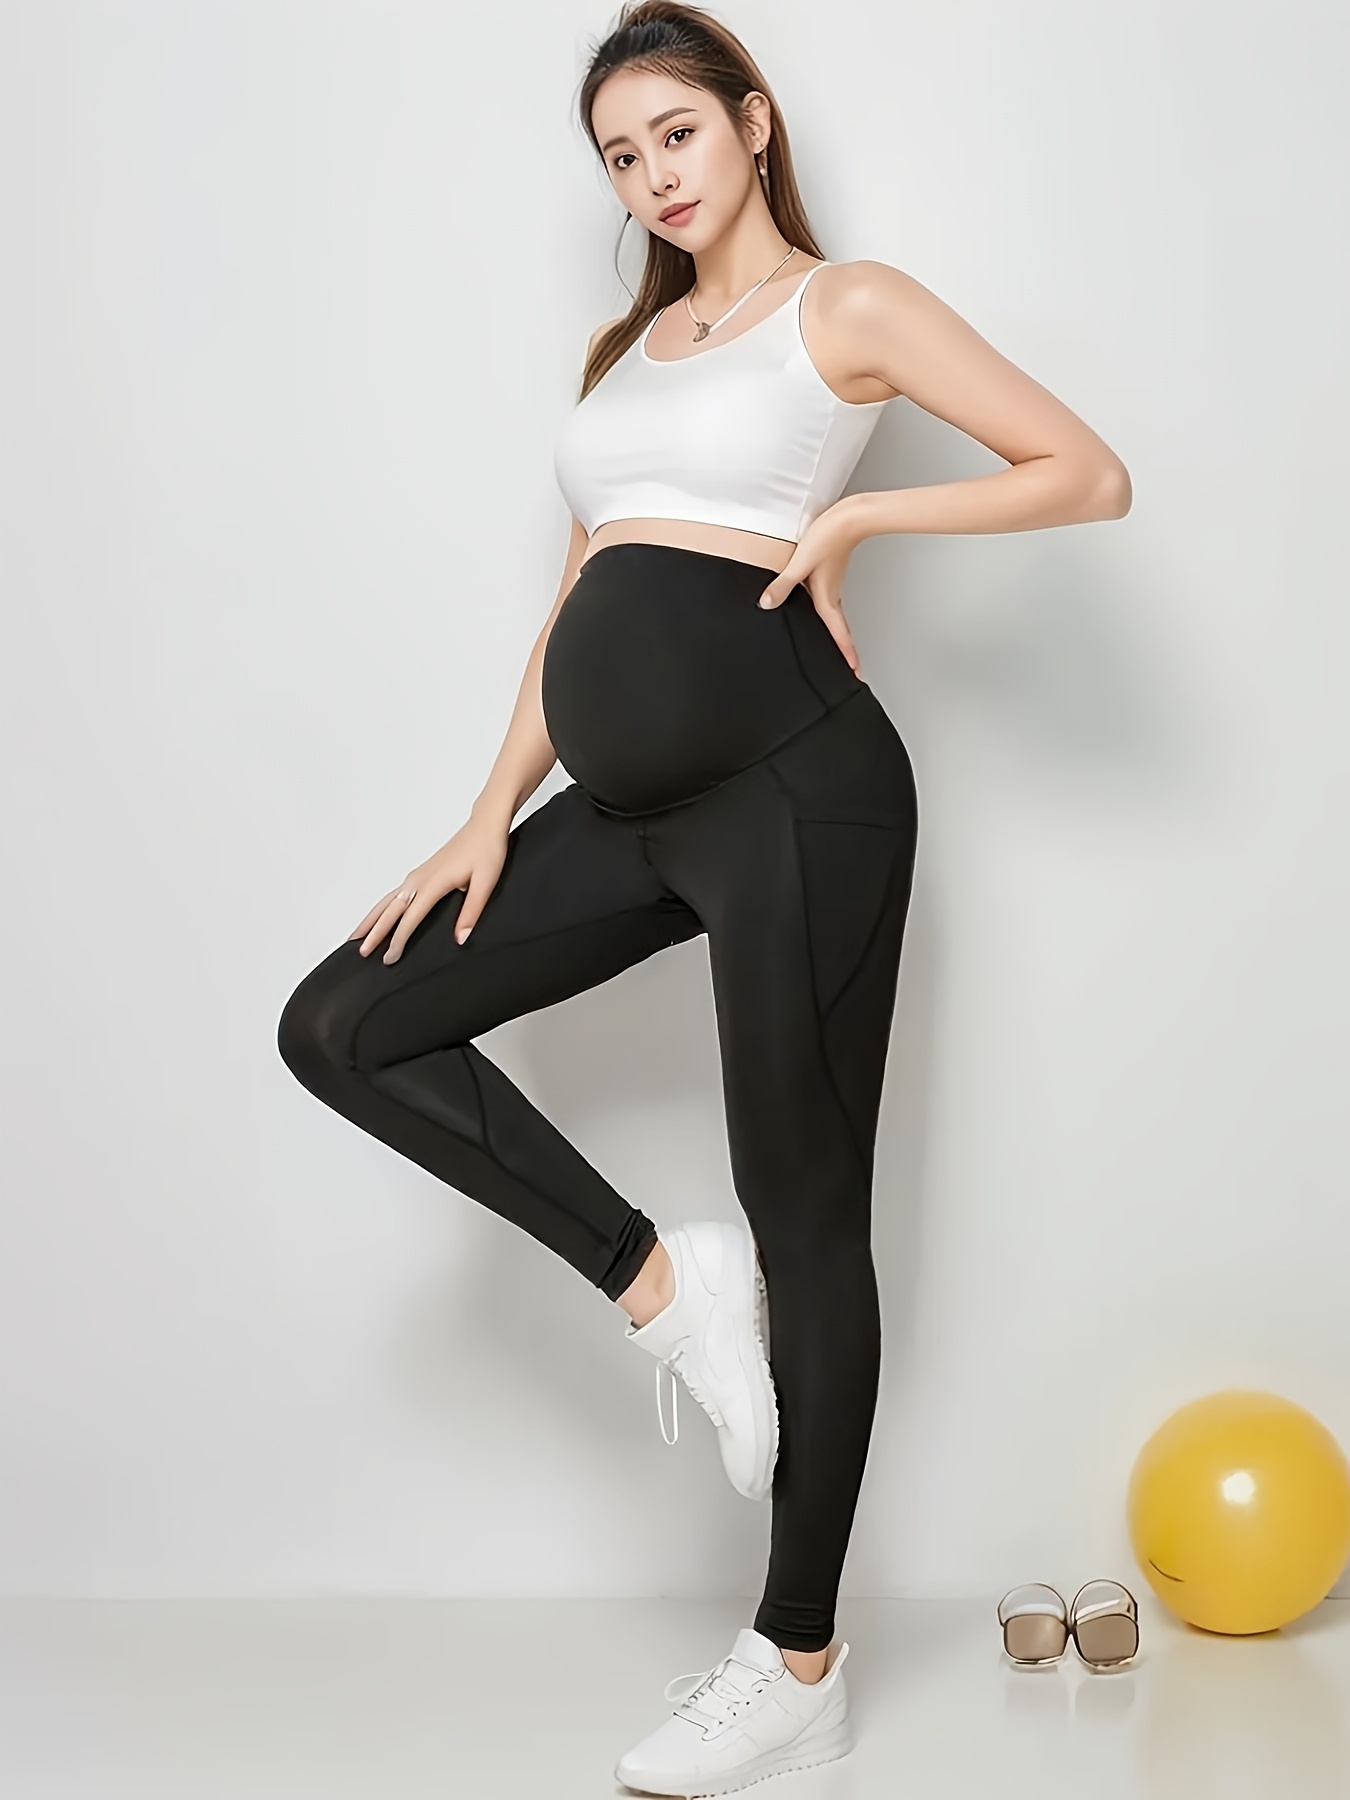 Women's Maternity Solid Leggings See Through Yoga Sports Pants, Pregnant  Women's Clothing